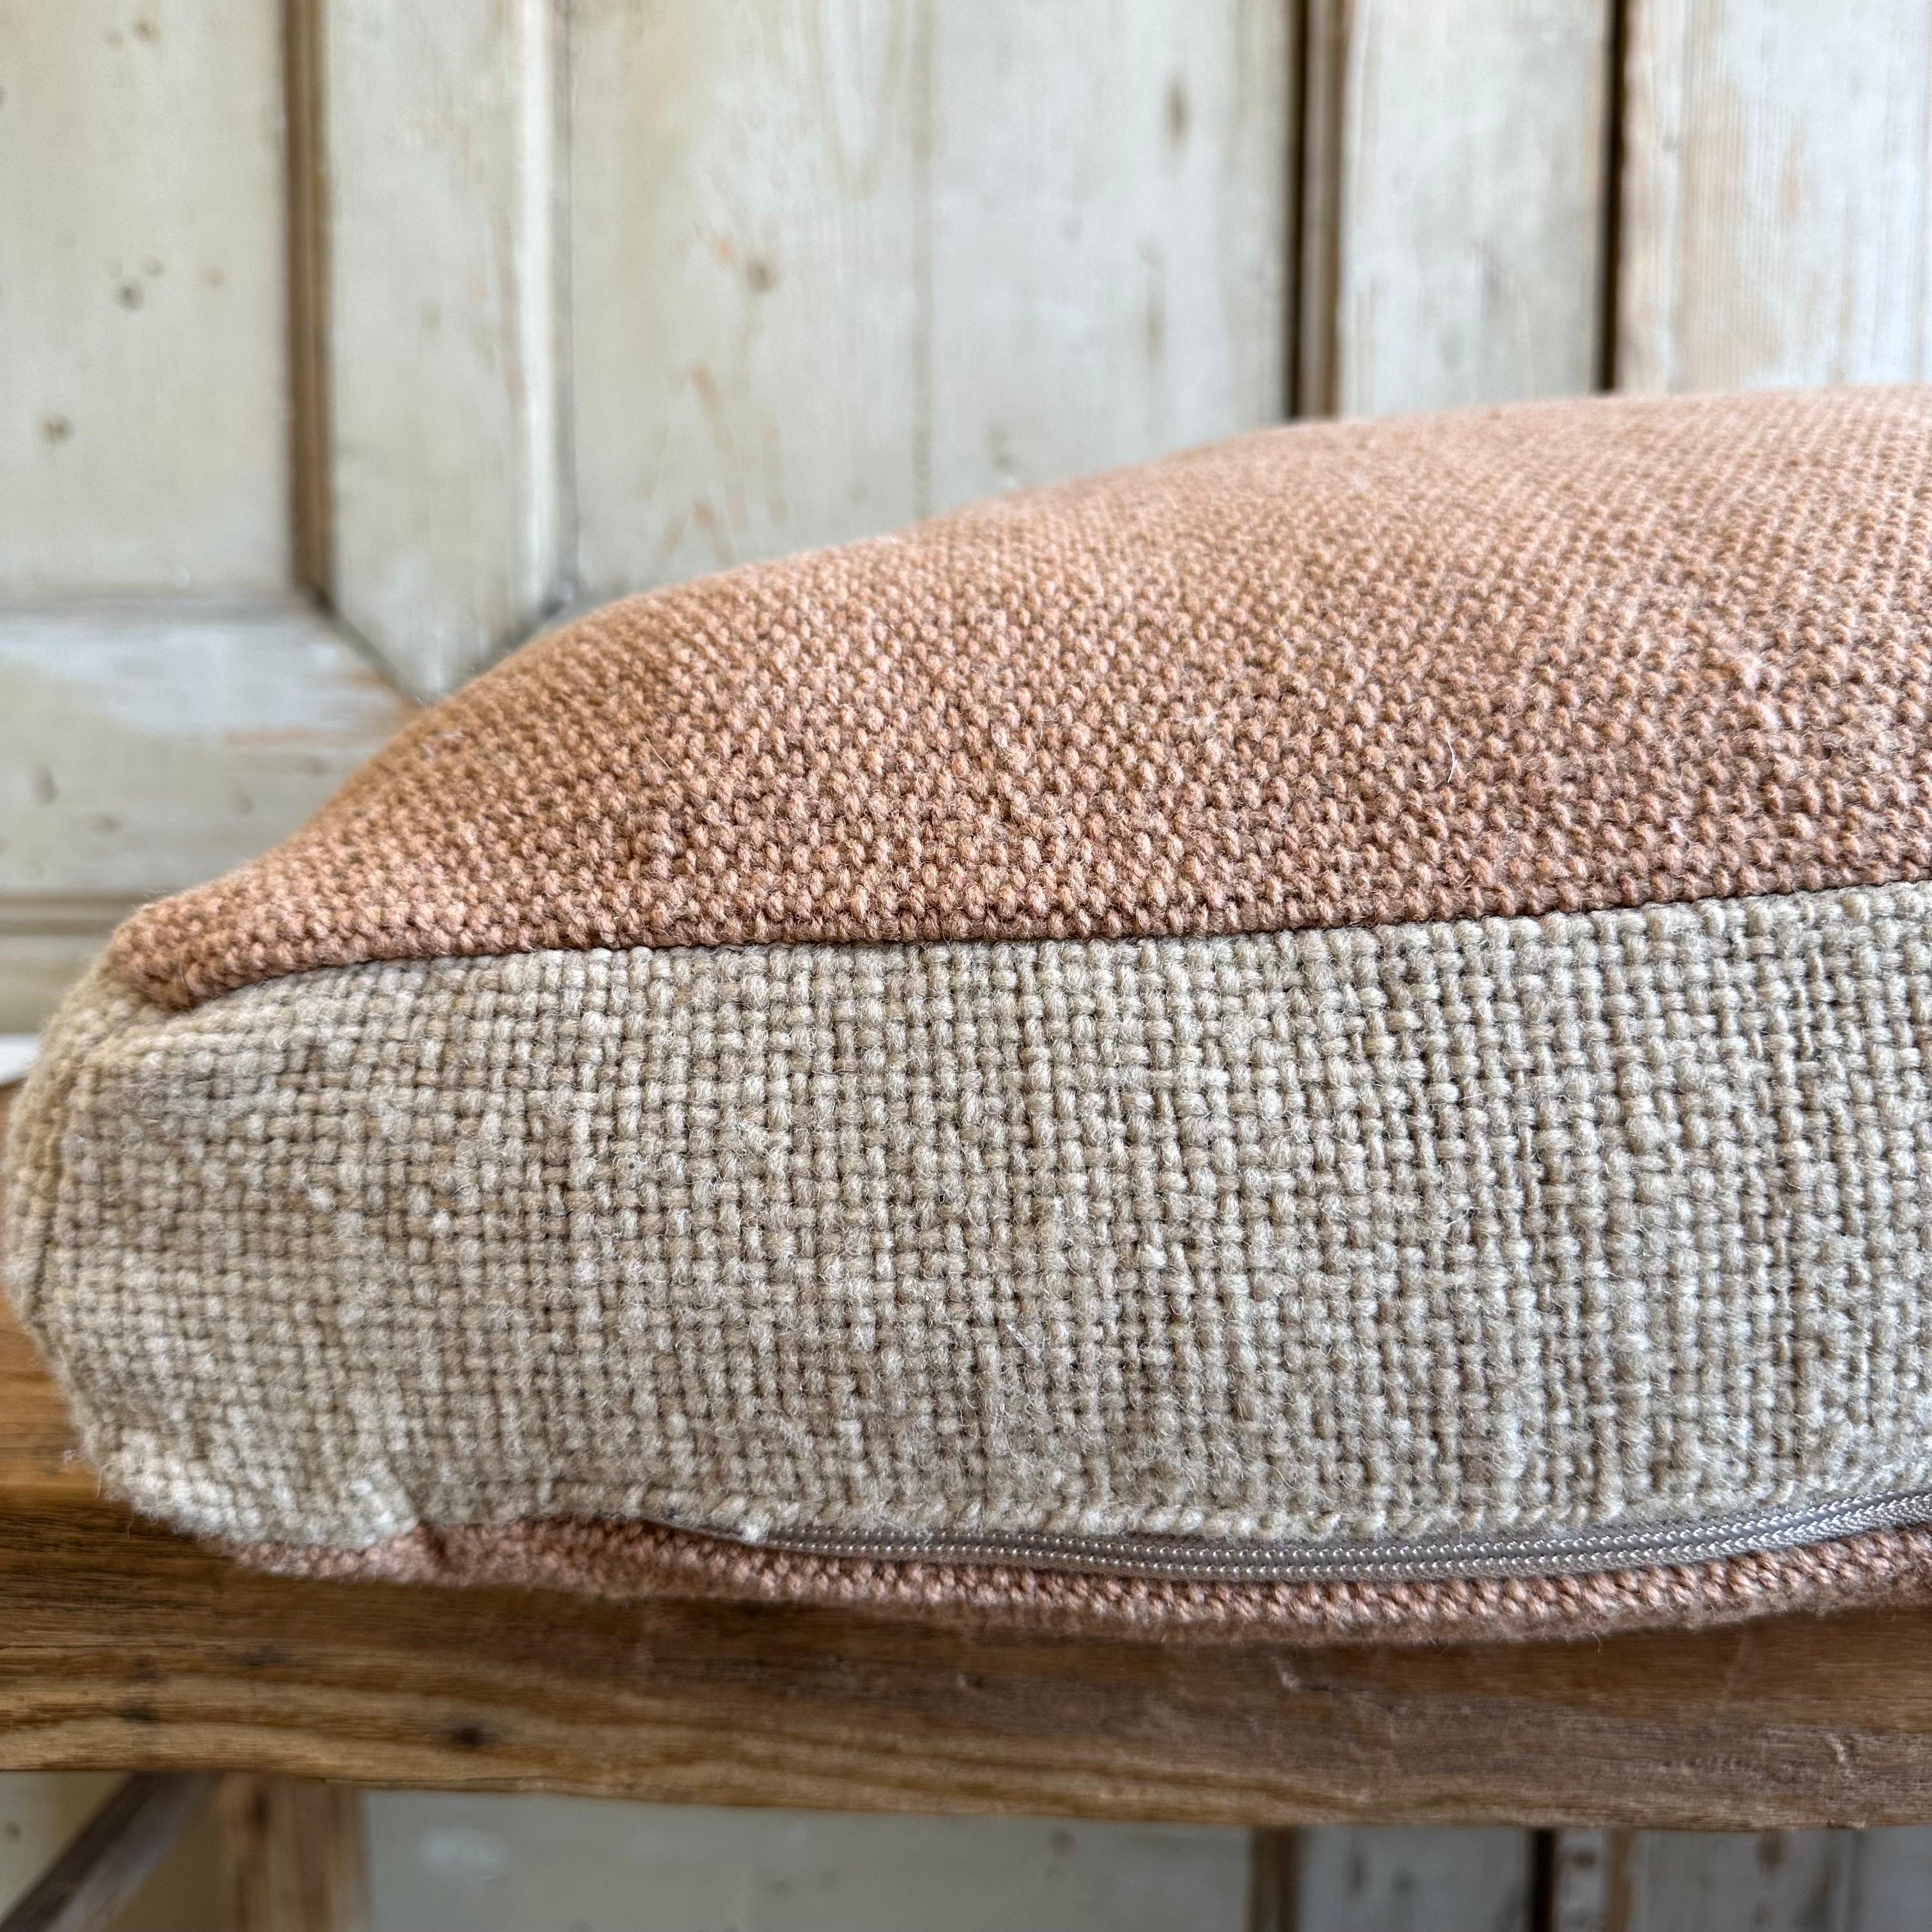 All of our products are commissioned and handmade by the craftswomen of Chiloé. The textiles are made with 100% wool from ’Chilota’ sheep, that are born and raised on the island.?The process by which these luxurious wool pieces are made starts with